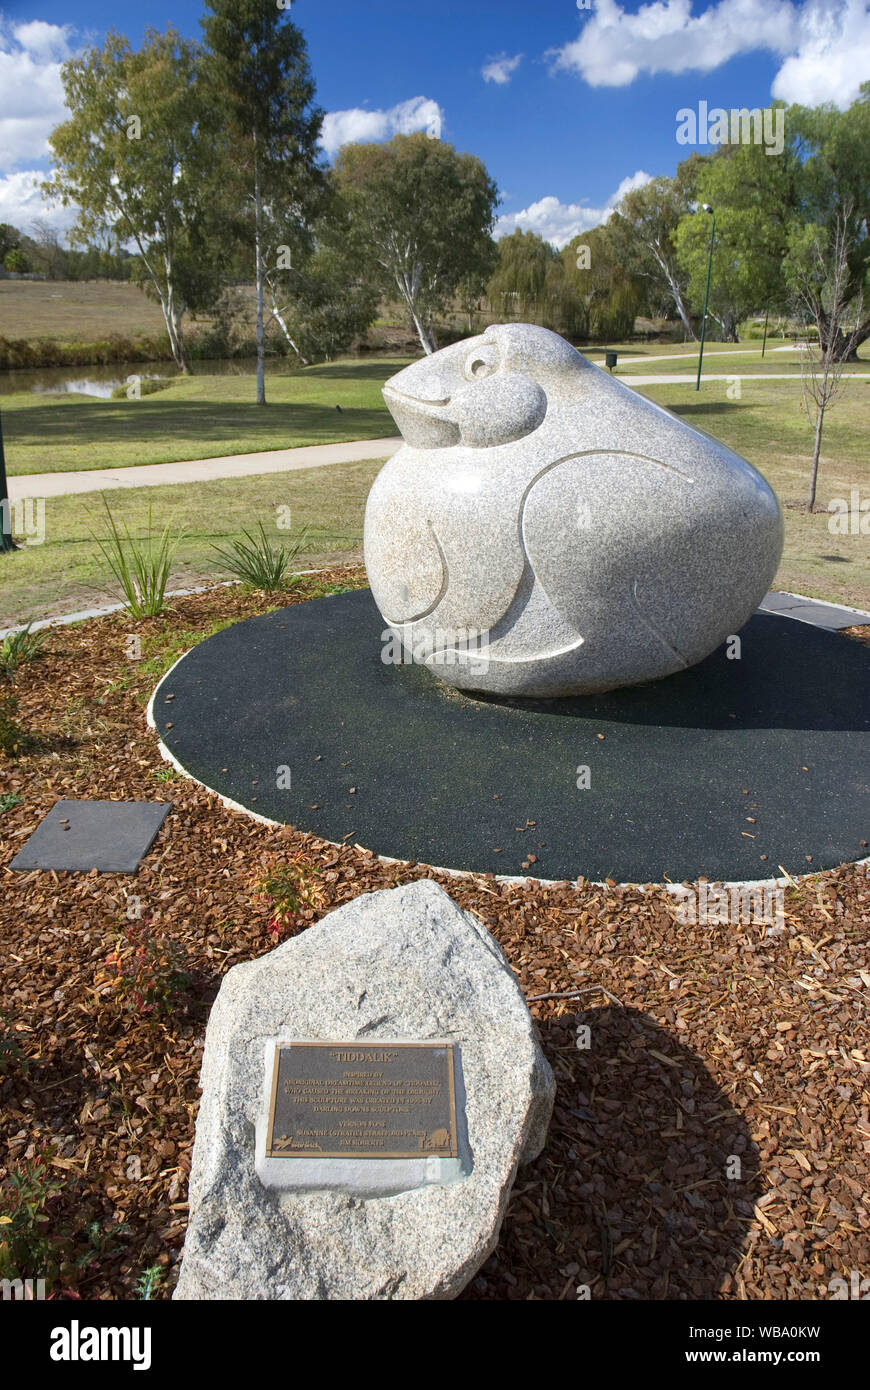 Sculpture of Tiddalik the Flood Maker, inspired by the Aboriginal Dreamtime legend of the frog who drank the waters dry. The site overlooks the Condam Stock Photo